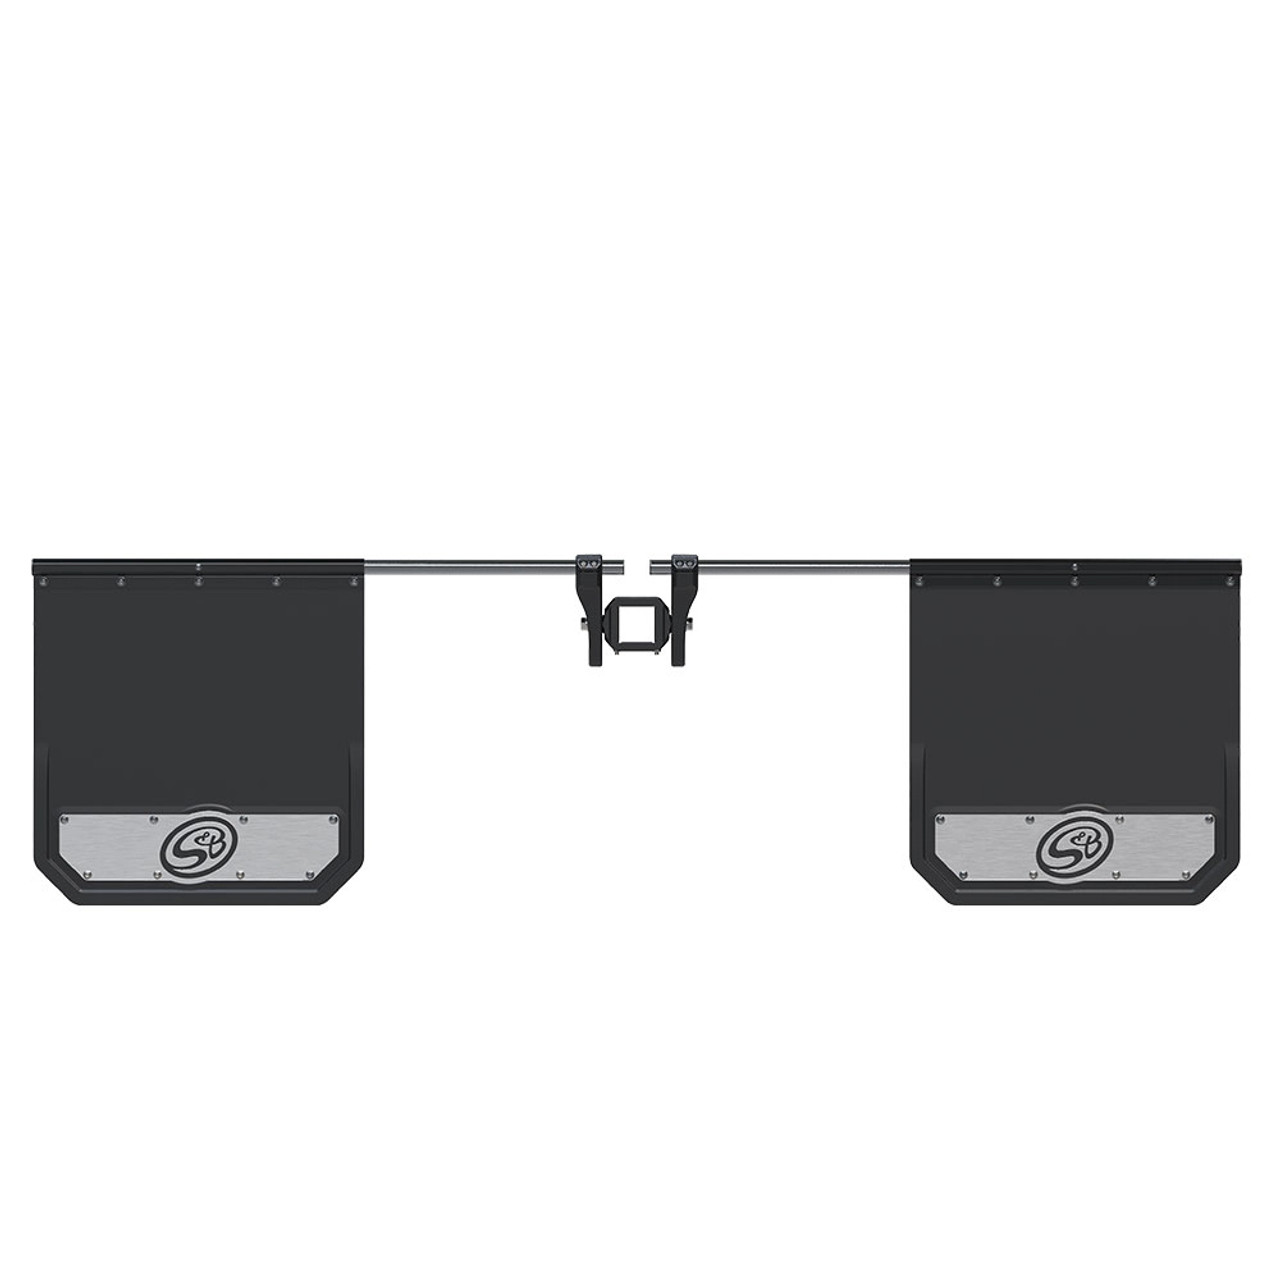 S&B MUD FLAP KIT w/ HITCH RECEIVER - Side front View